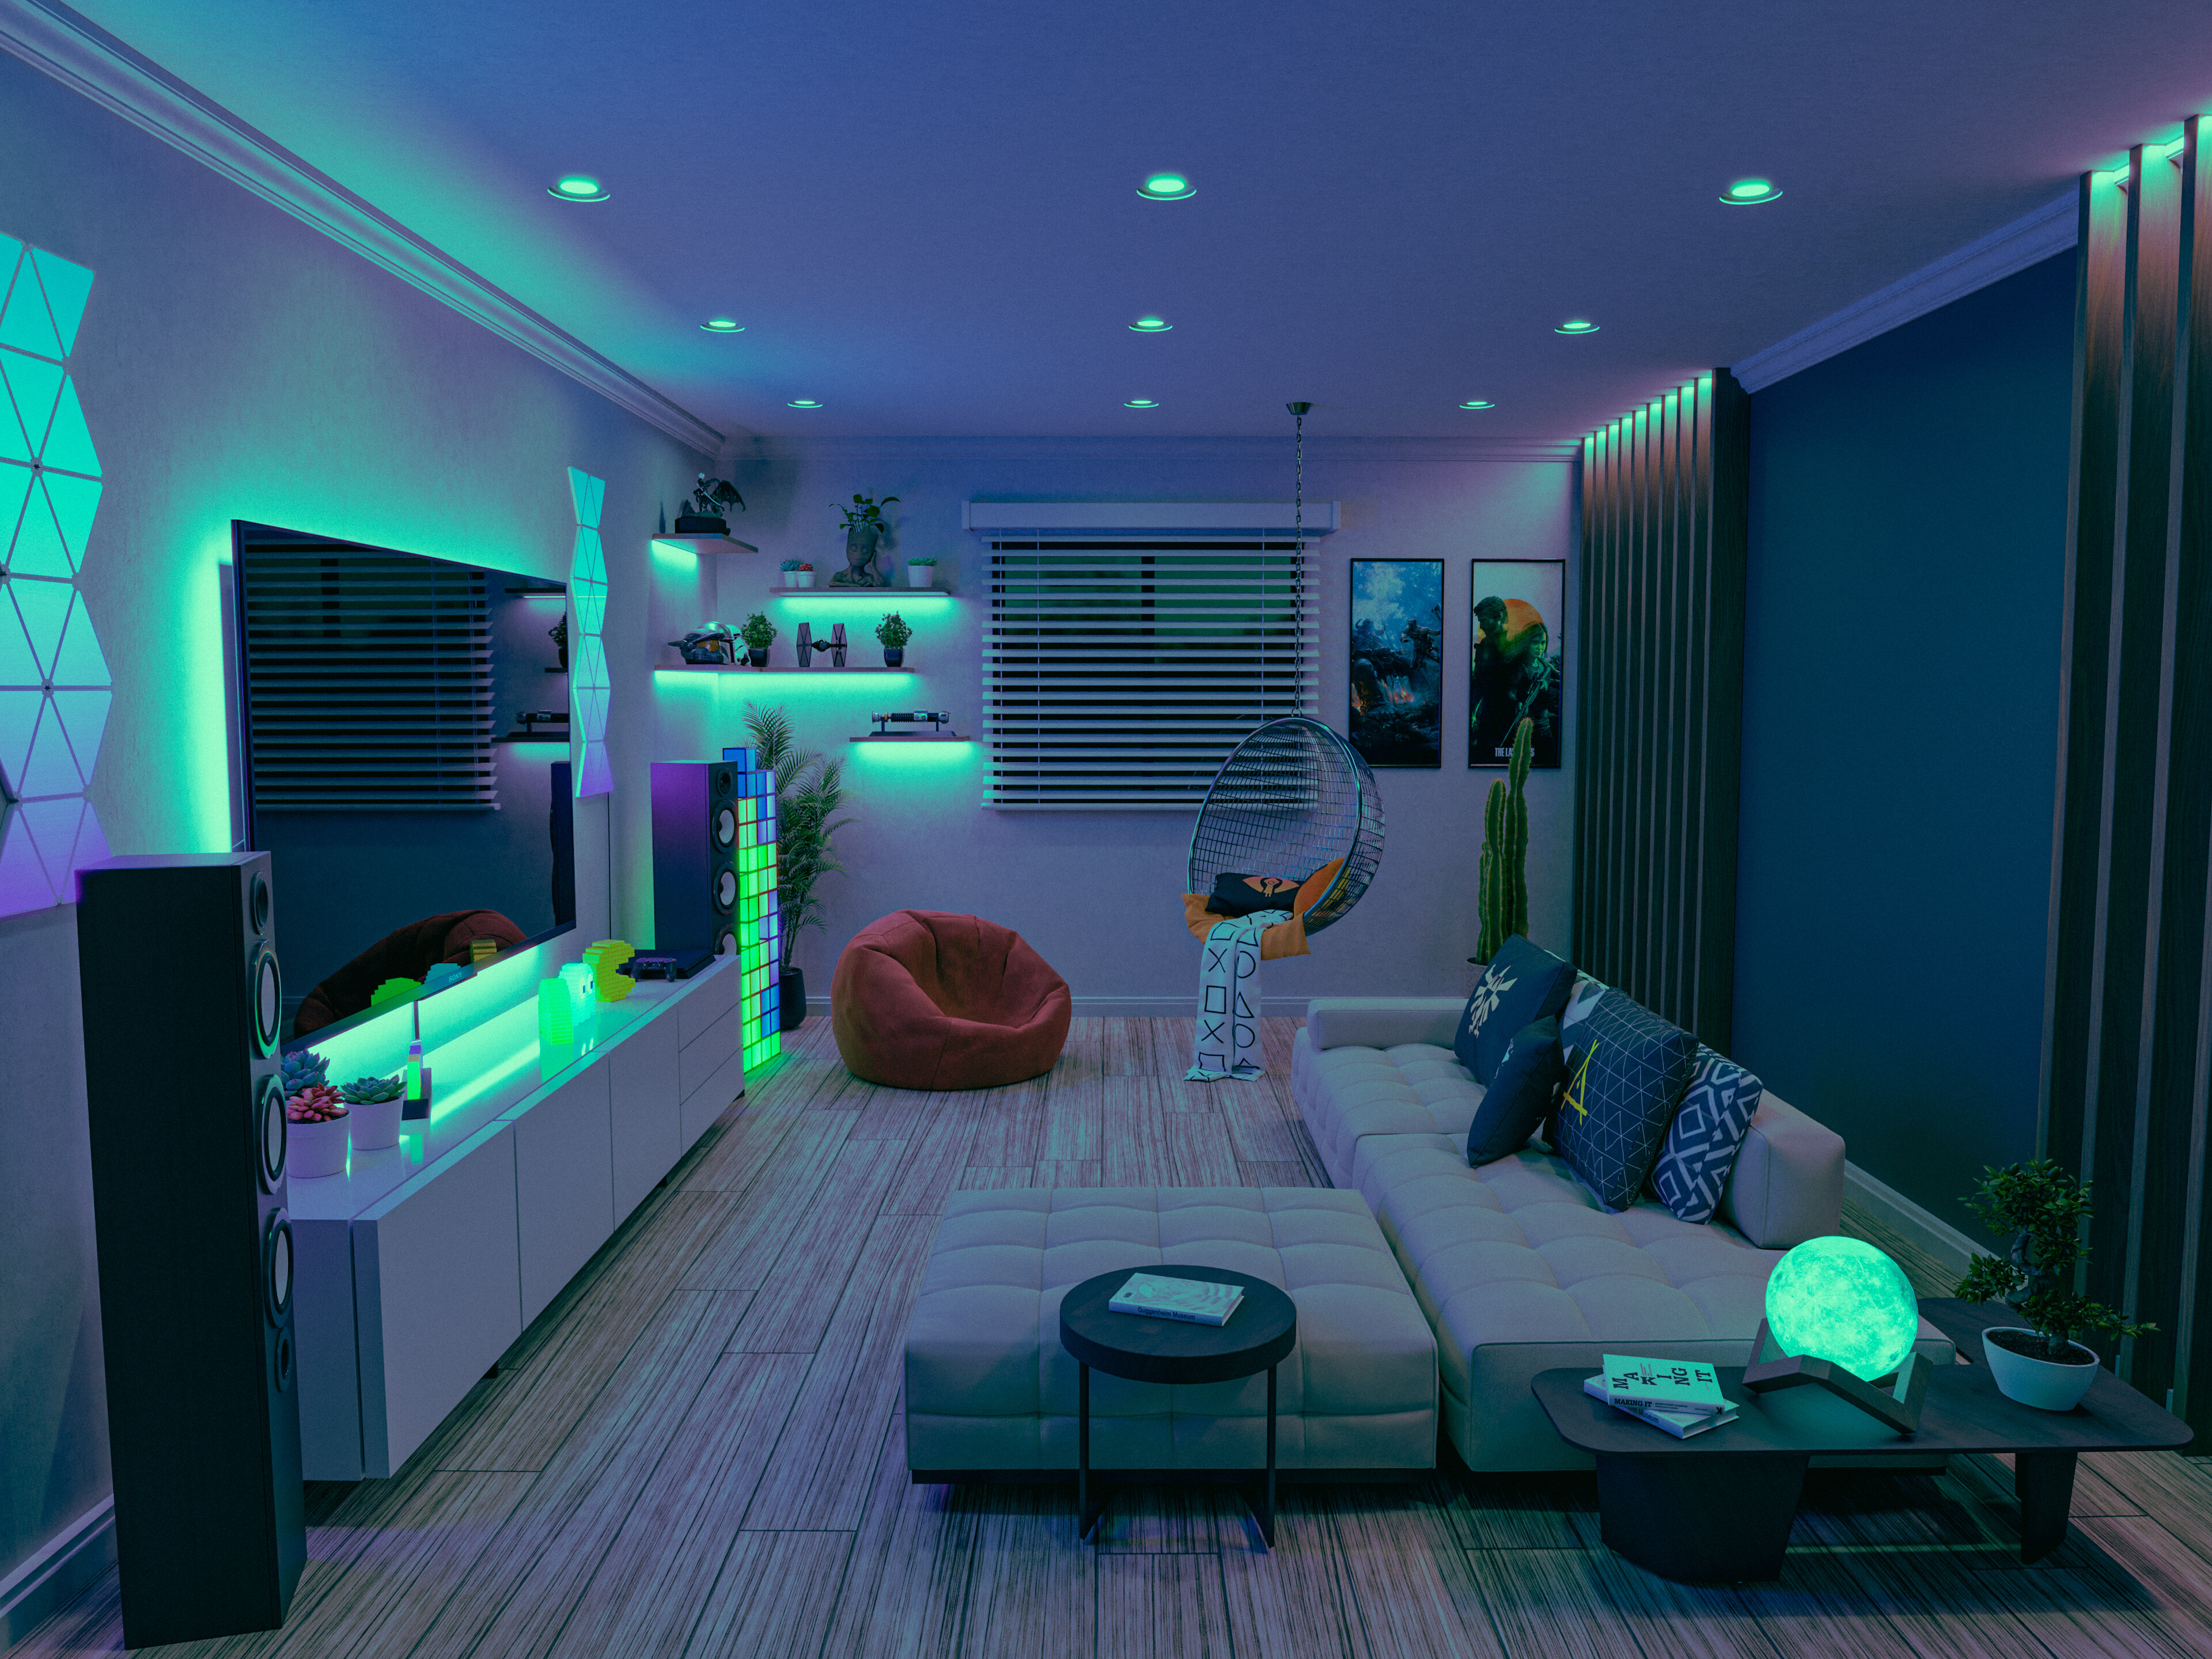 Gaming Room Visualization - Finished Projects - Blender Artists Community, gaming  room 